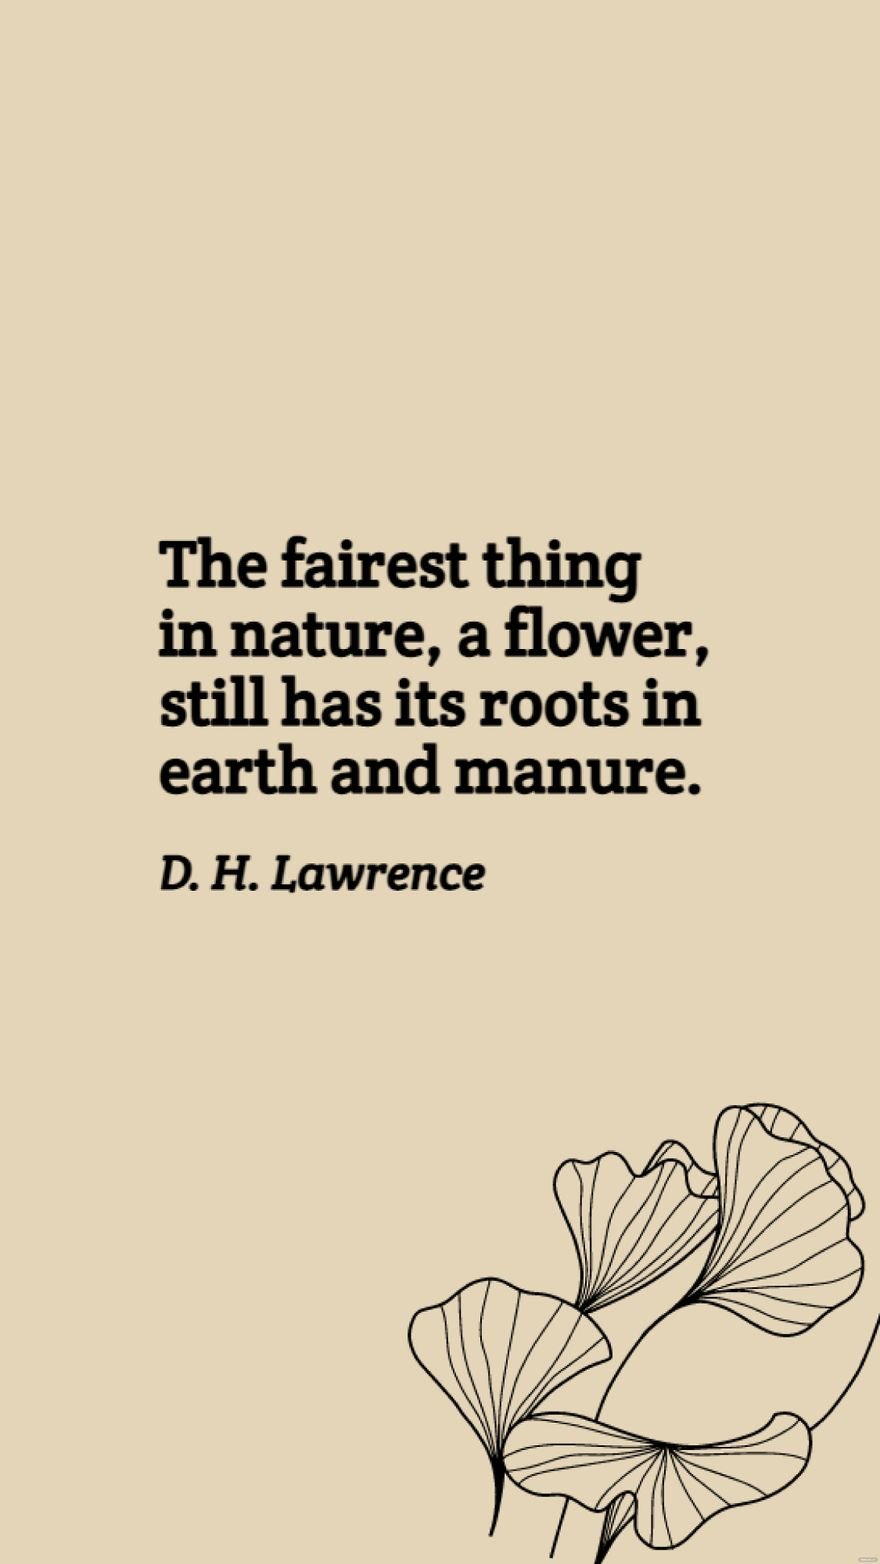 D. H. Lawrence - The fairest thing in nature, a flower, still has its roots in earth and manure. in JPG